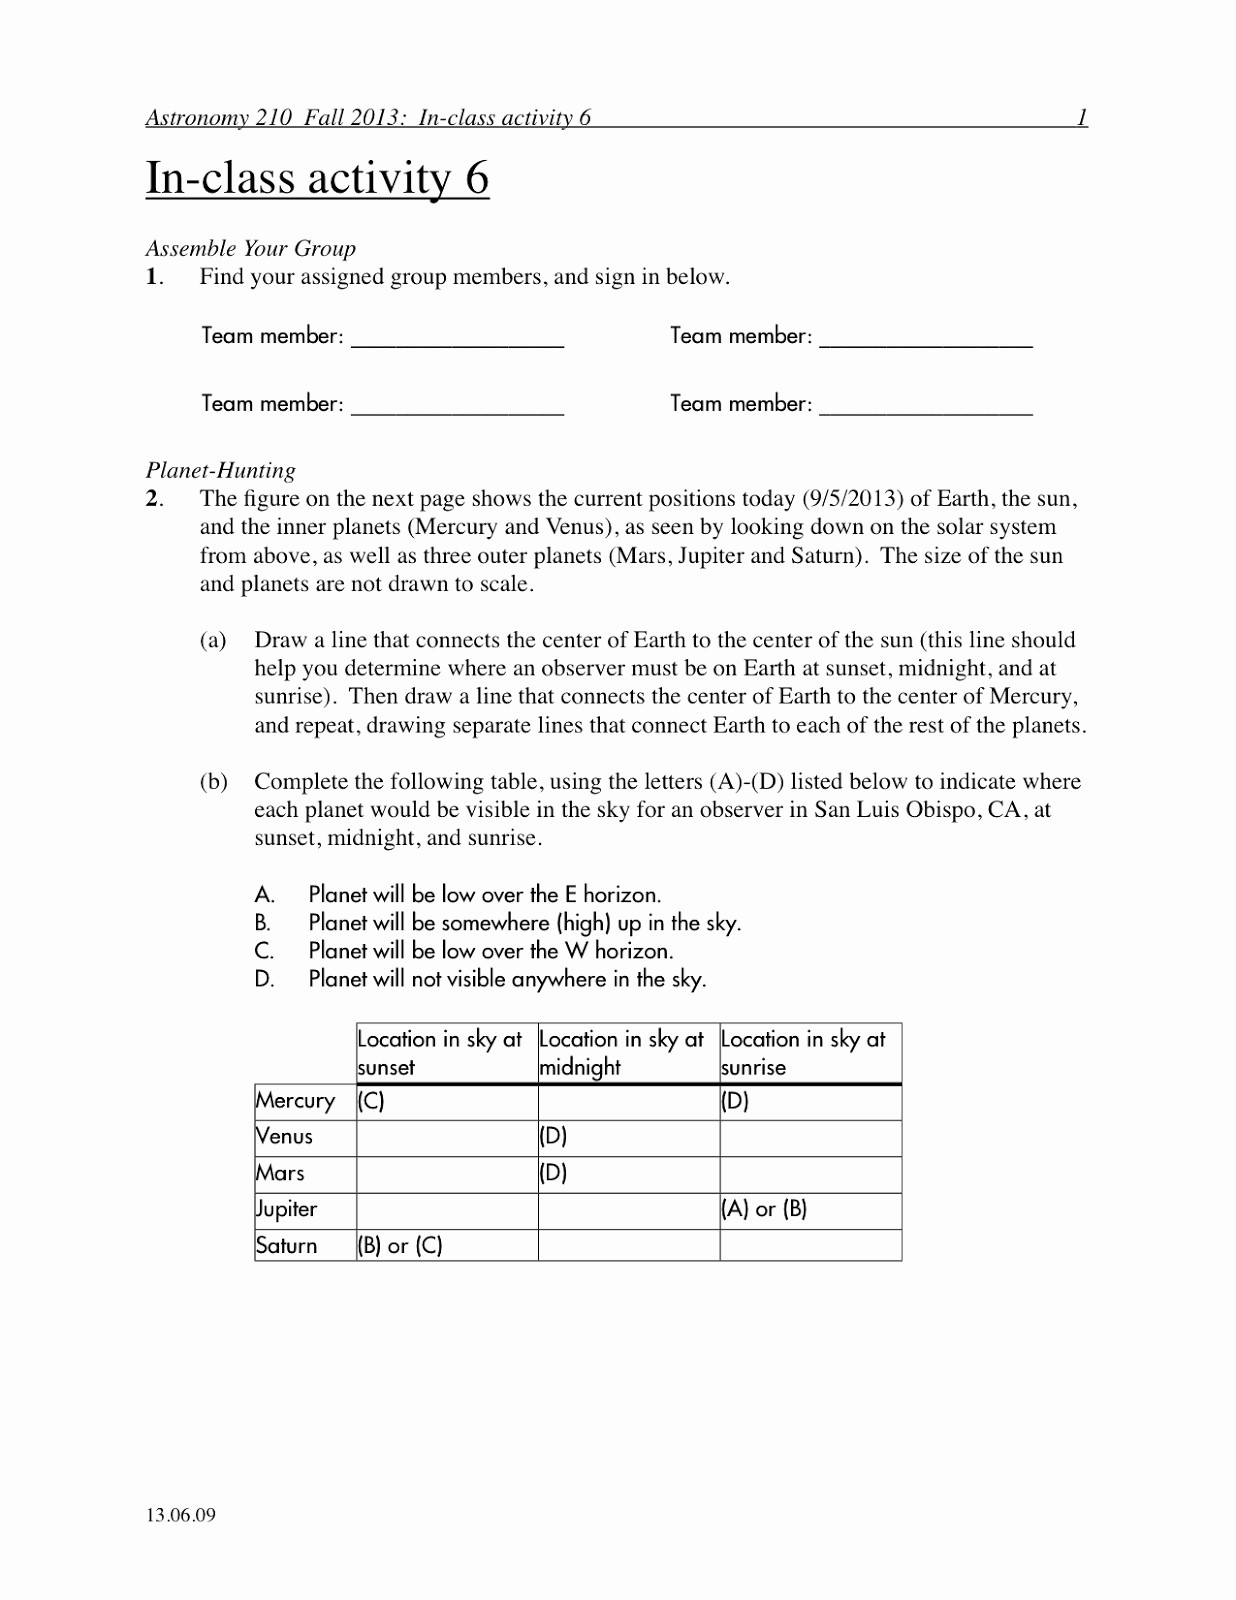 Heat Transfer Worksheet Answer Key Awesome 15 Best Of Section 1 Reinforcement Fossils